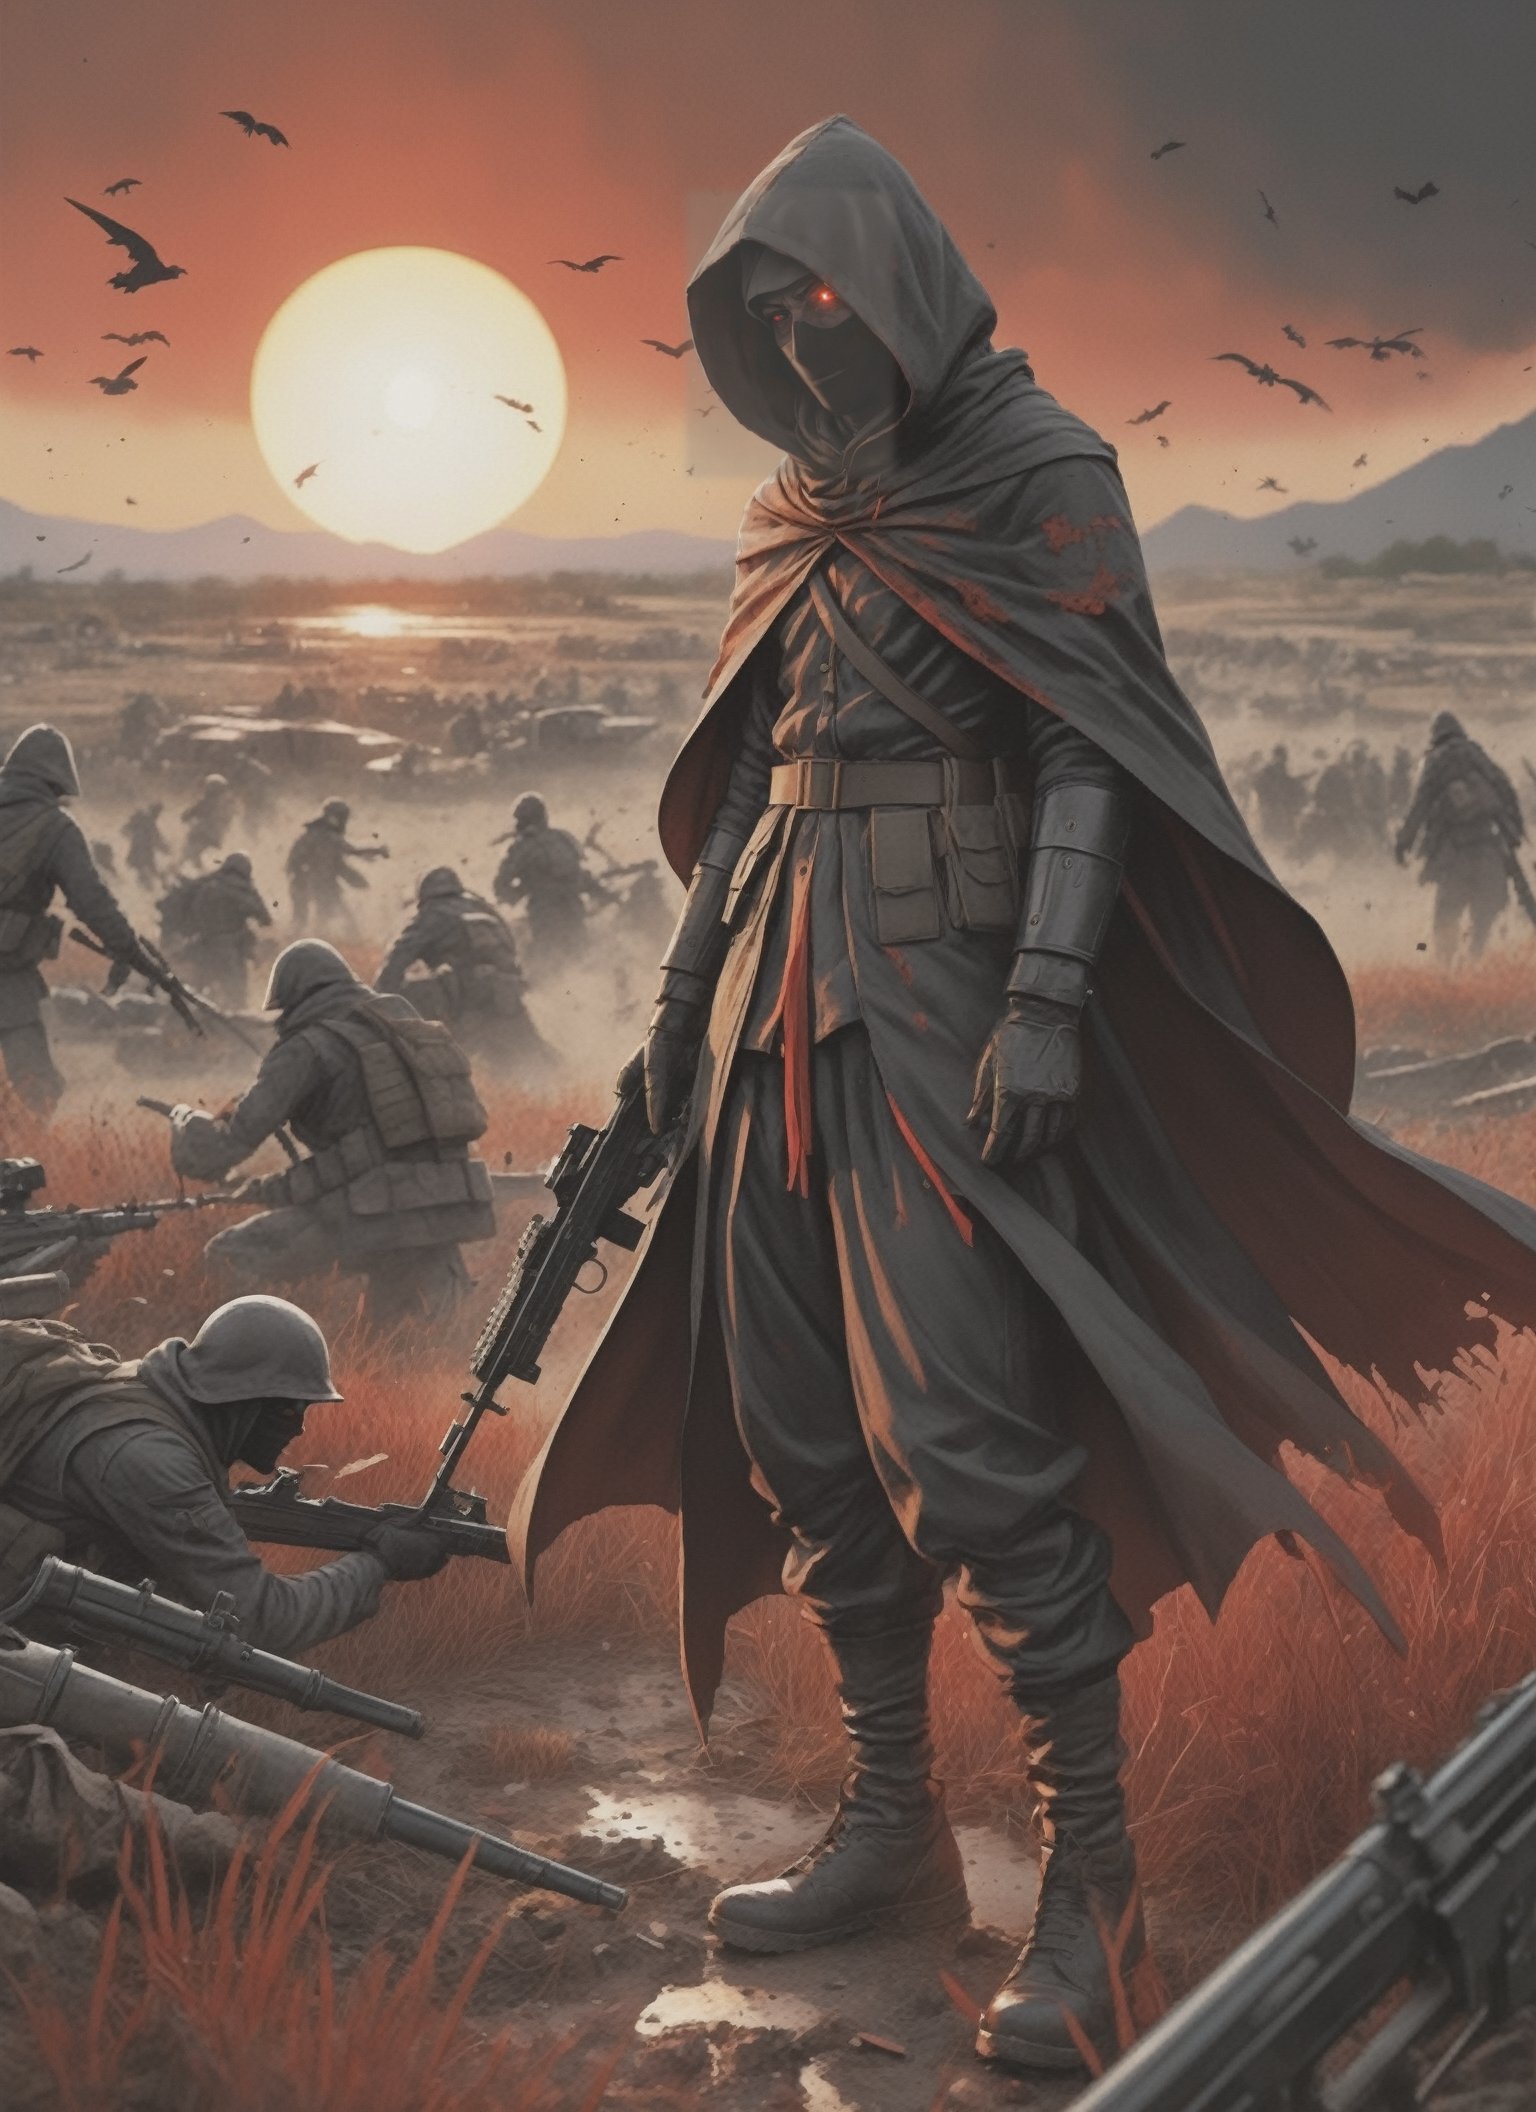 photorealistic highly detailed 8k raw anime artwork, (Hooded figure overlooks battlefield:1.3), (Sinking sun paints red:1.2), Fallen troops seen, Stealthy assassin, Determined eyes, Weapon raised, Ominous battleground, Intense shadows, Gripping scene, Lifelike, precise, detailed, top down perspective
